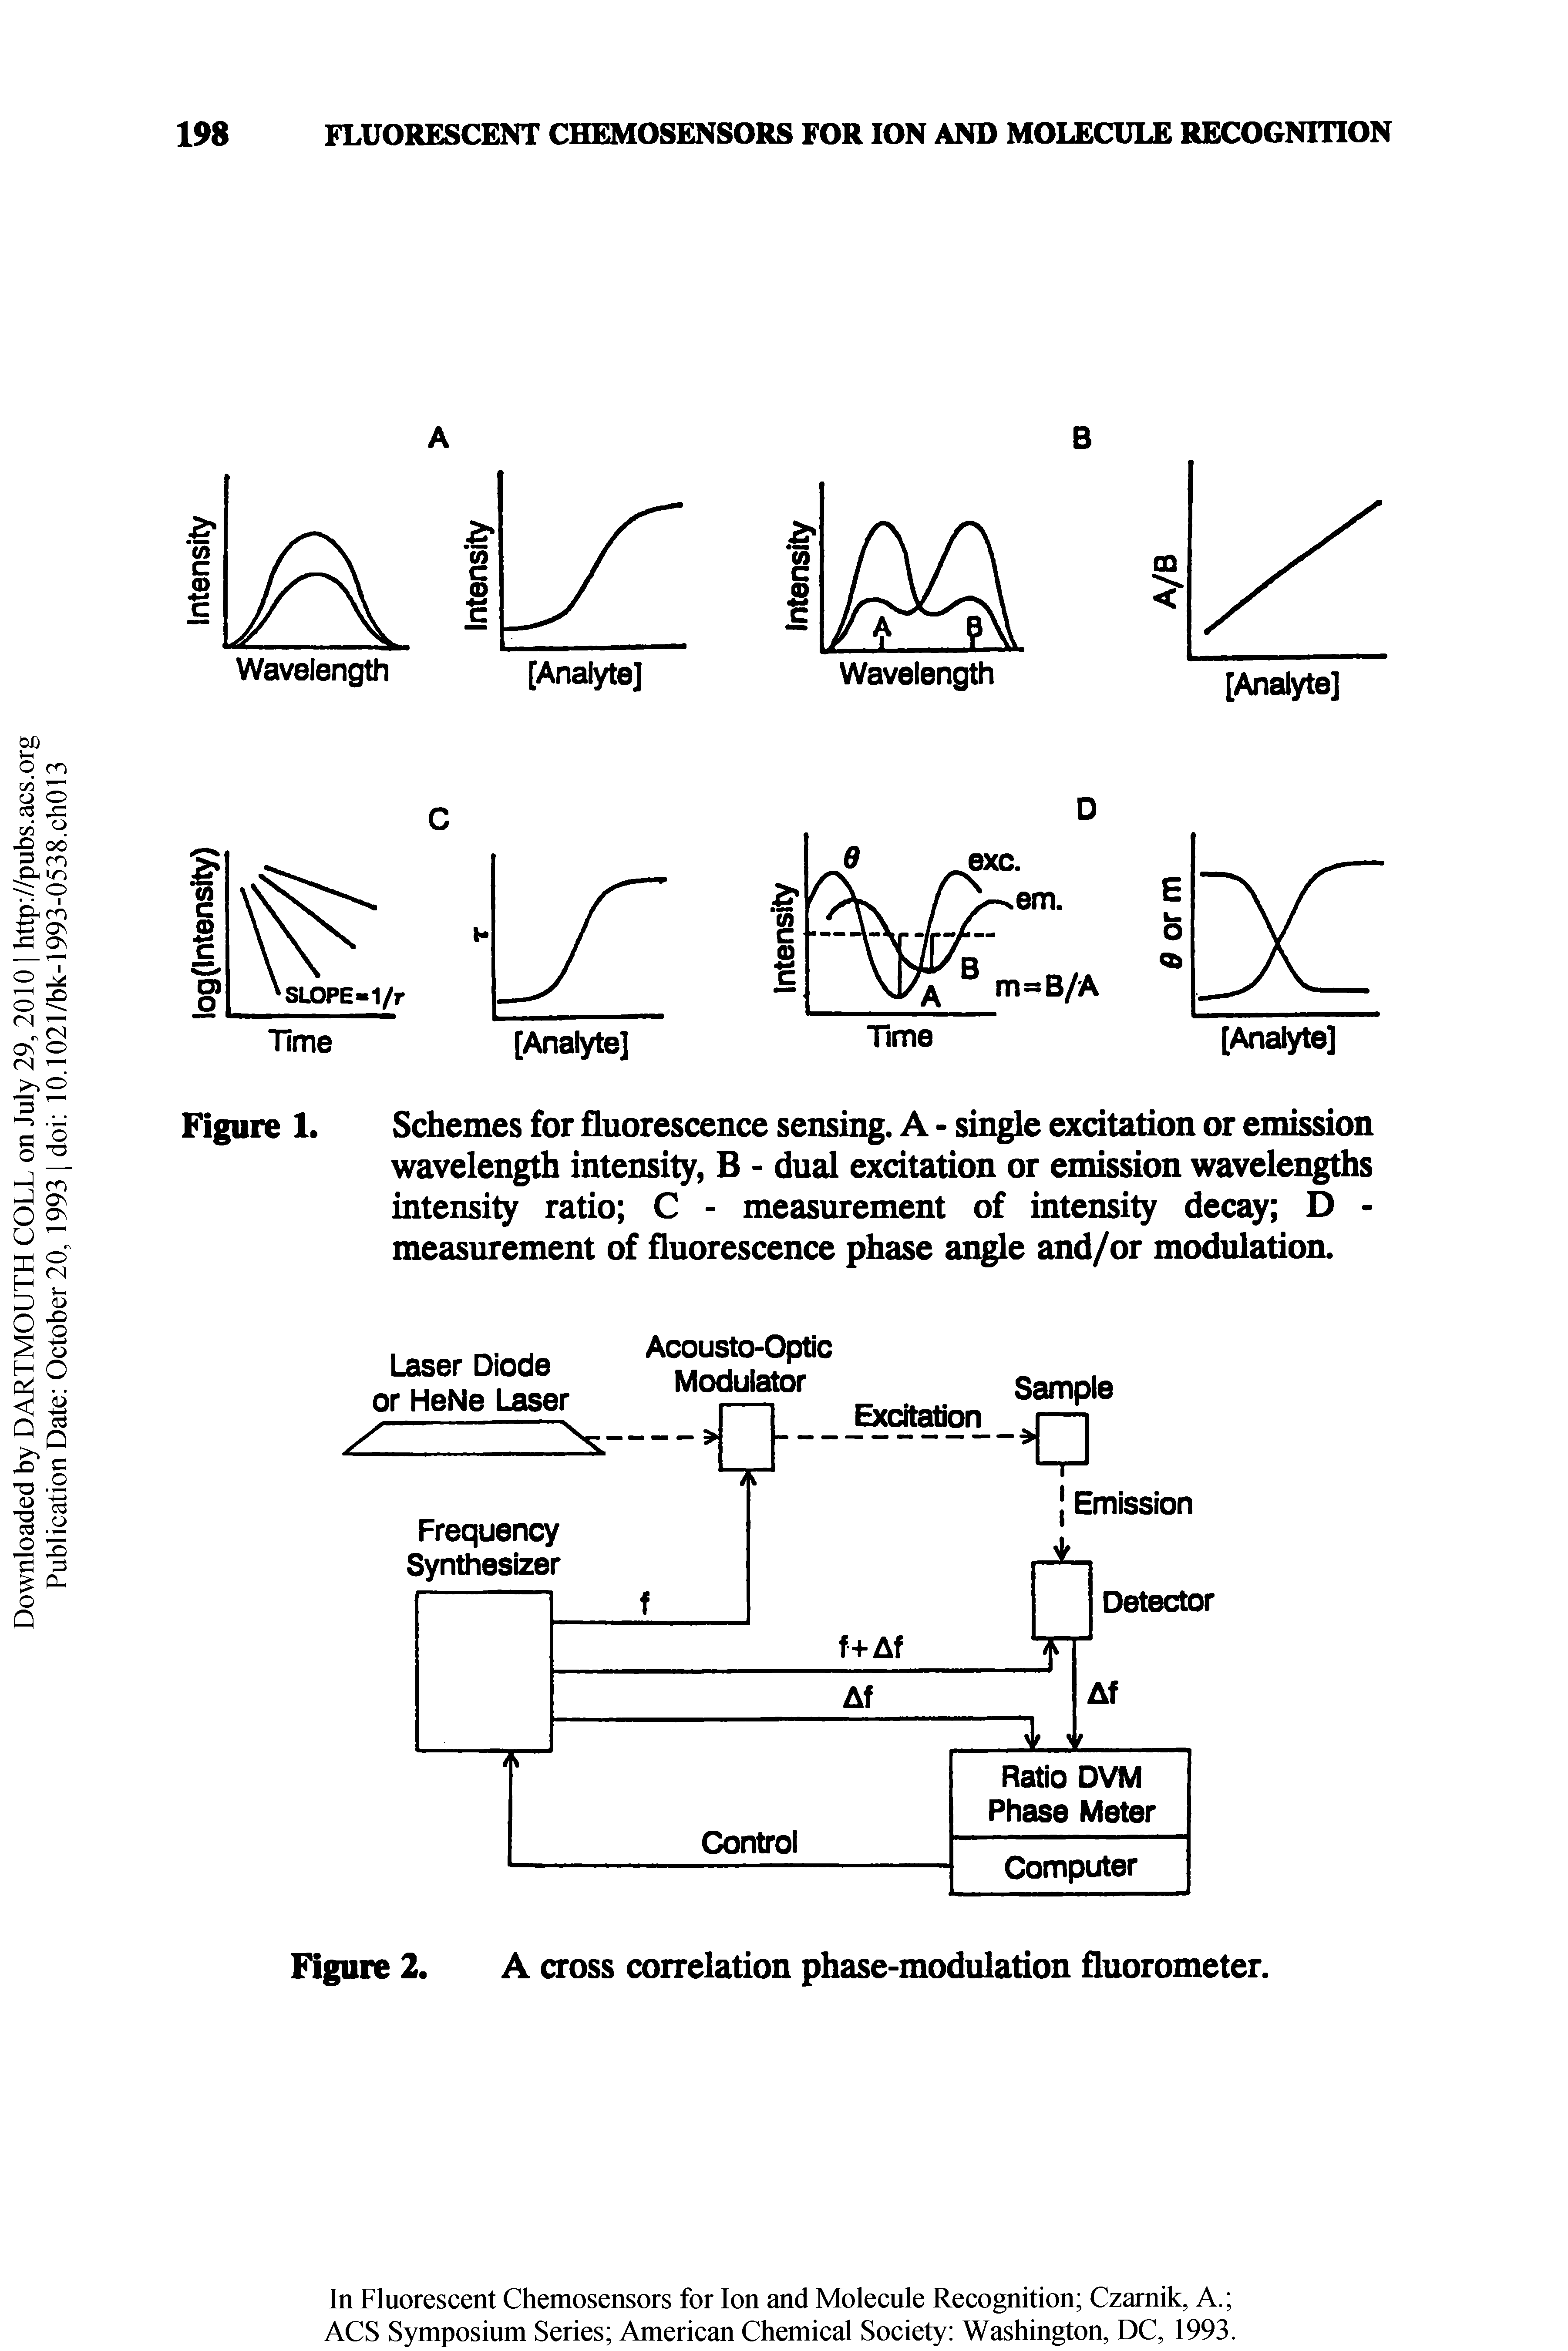 Figure 1. Schemes for fluorescence sensing. A - single excitation or emission wavelength intensity, B - dual excitation or emission wavelengths intensity ratio C - measurement of intensity decay D -measurement of fluorescence phase angle and/or modulation.